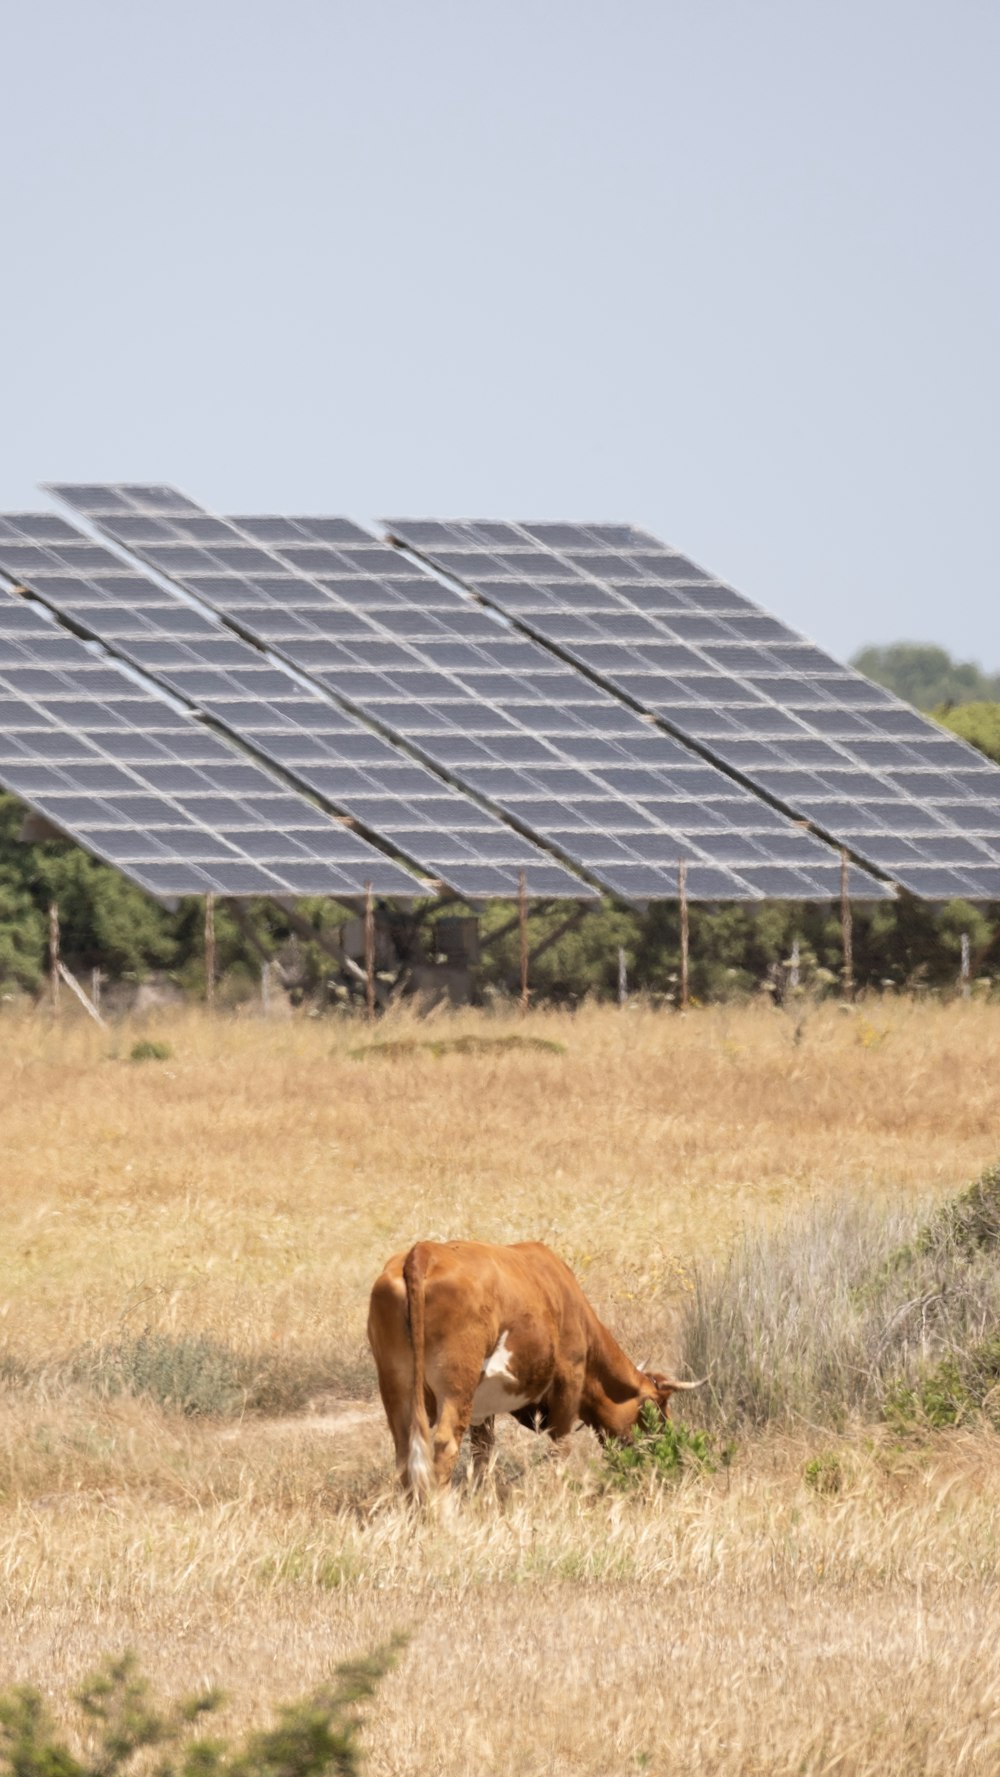 a cow grazing in a field with a solar panel in the background